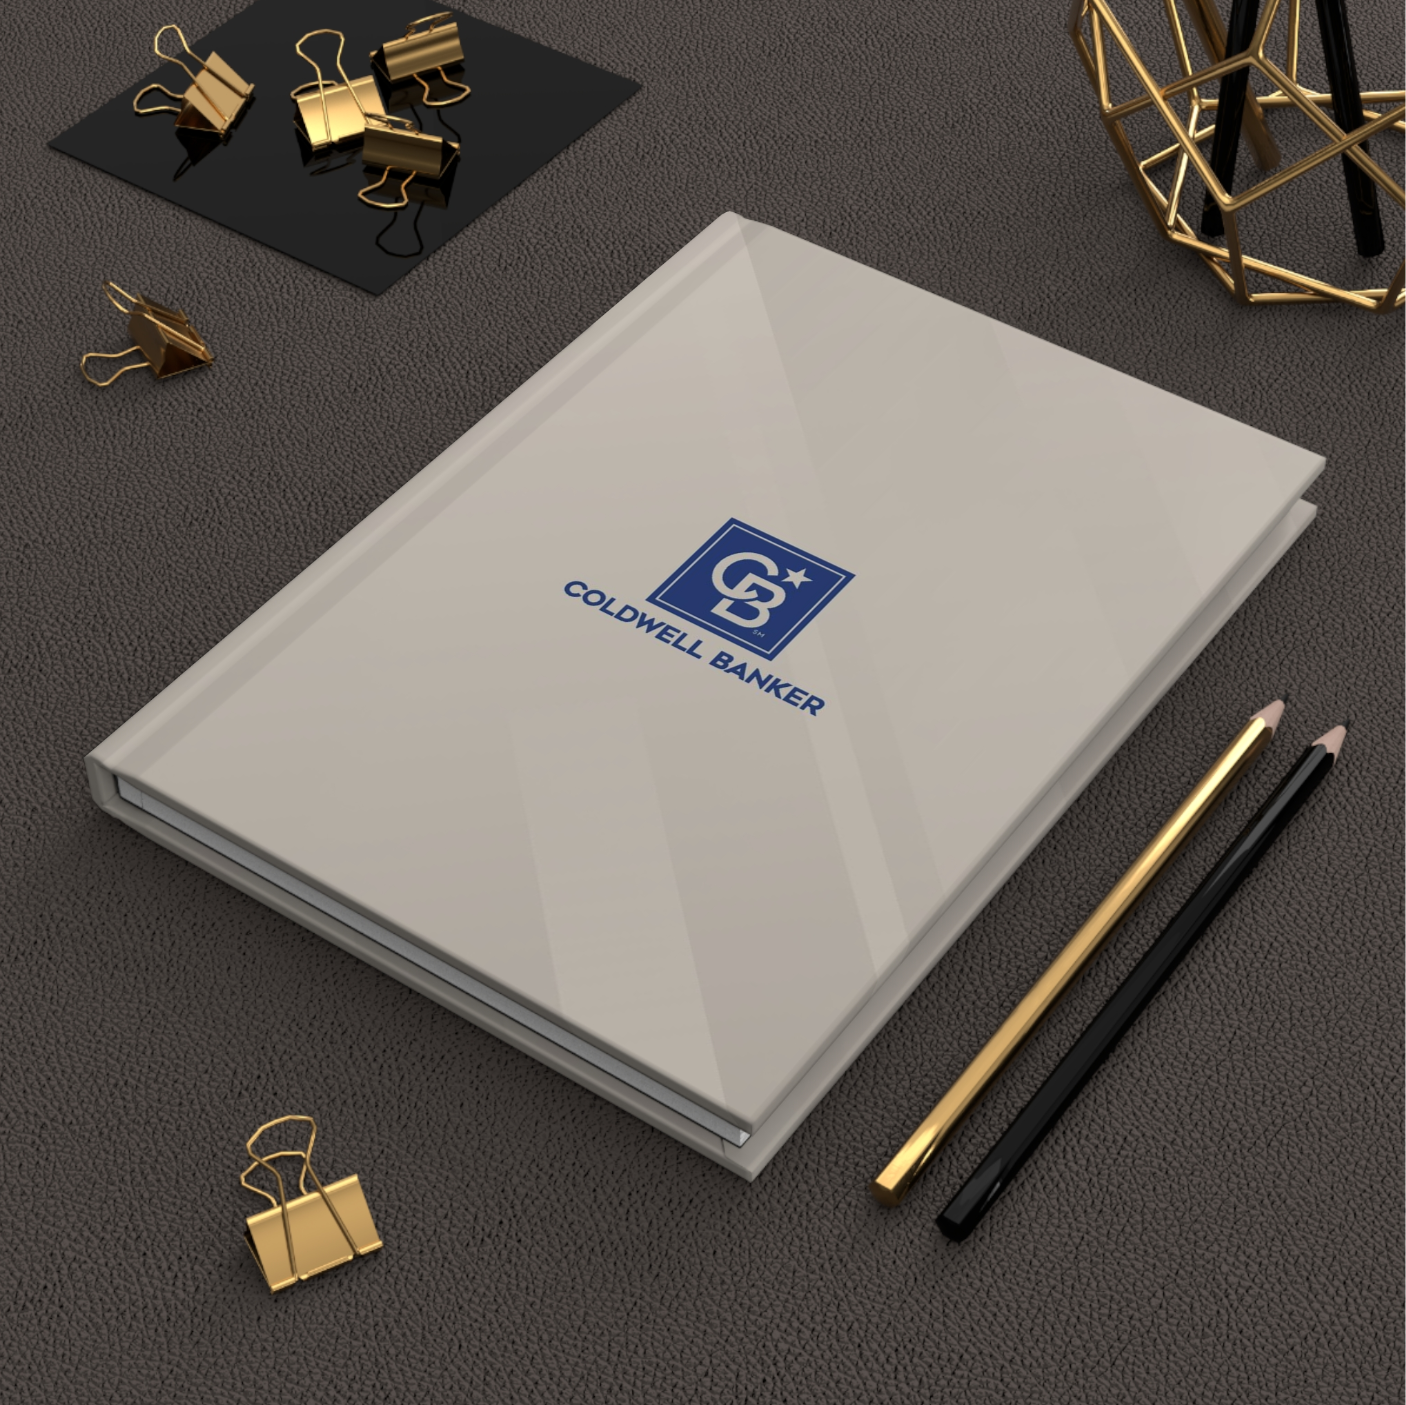 Coldwell Banker Full Color Hardcover Binders Linen print (from as low as $10.46 per cover)